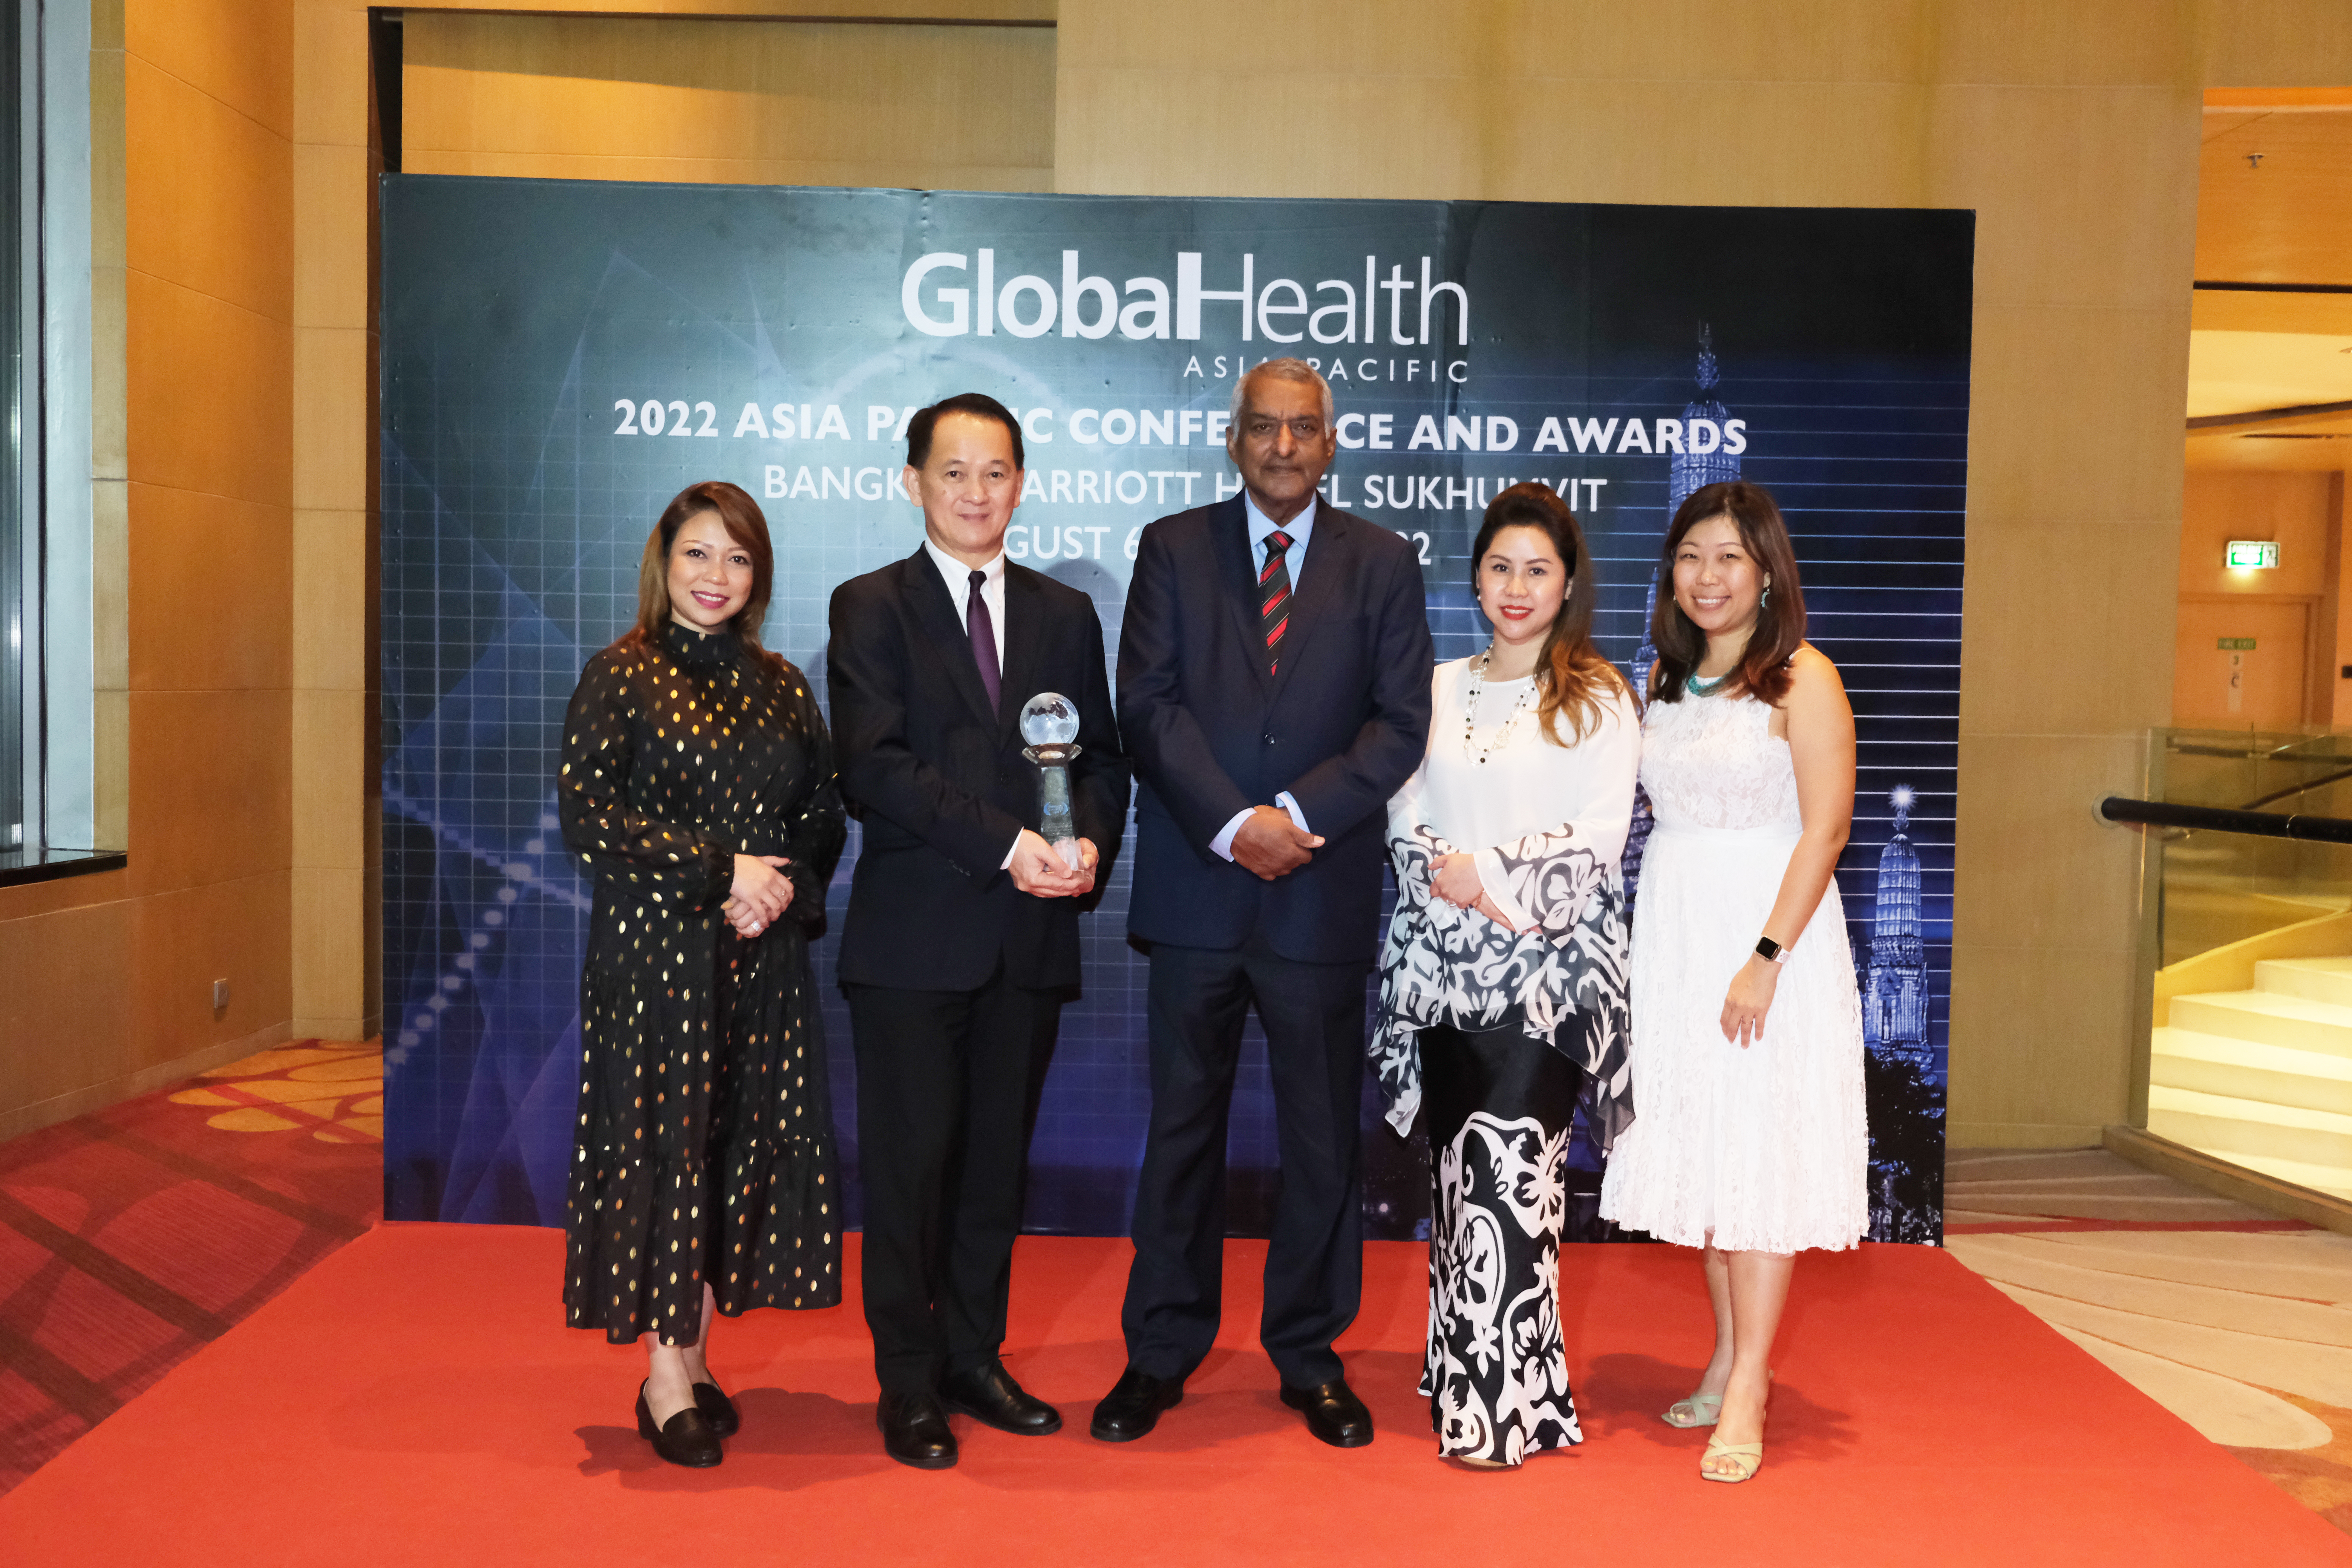 Subang Jaya Medical Centre Clinches Six Global Health Asia-Pacific Awards 2022 as a Leading Healthcare Provider